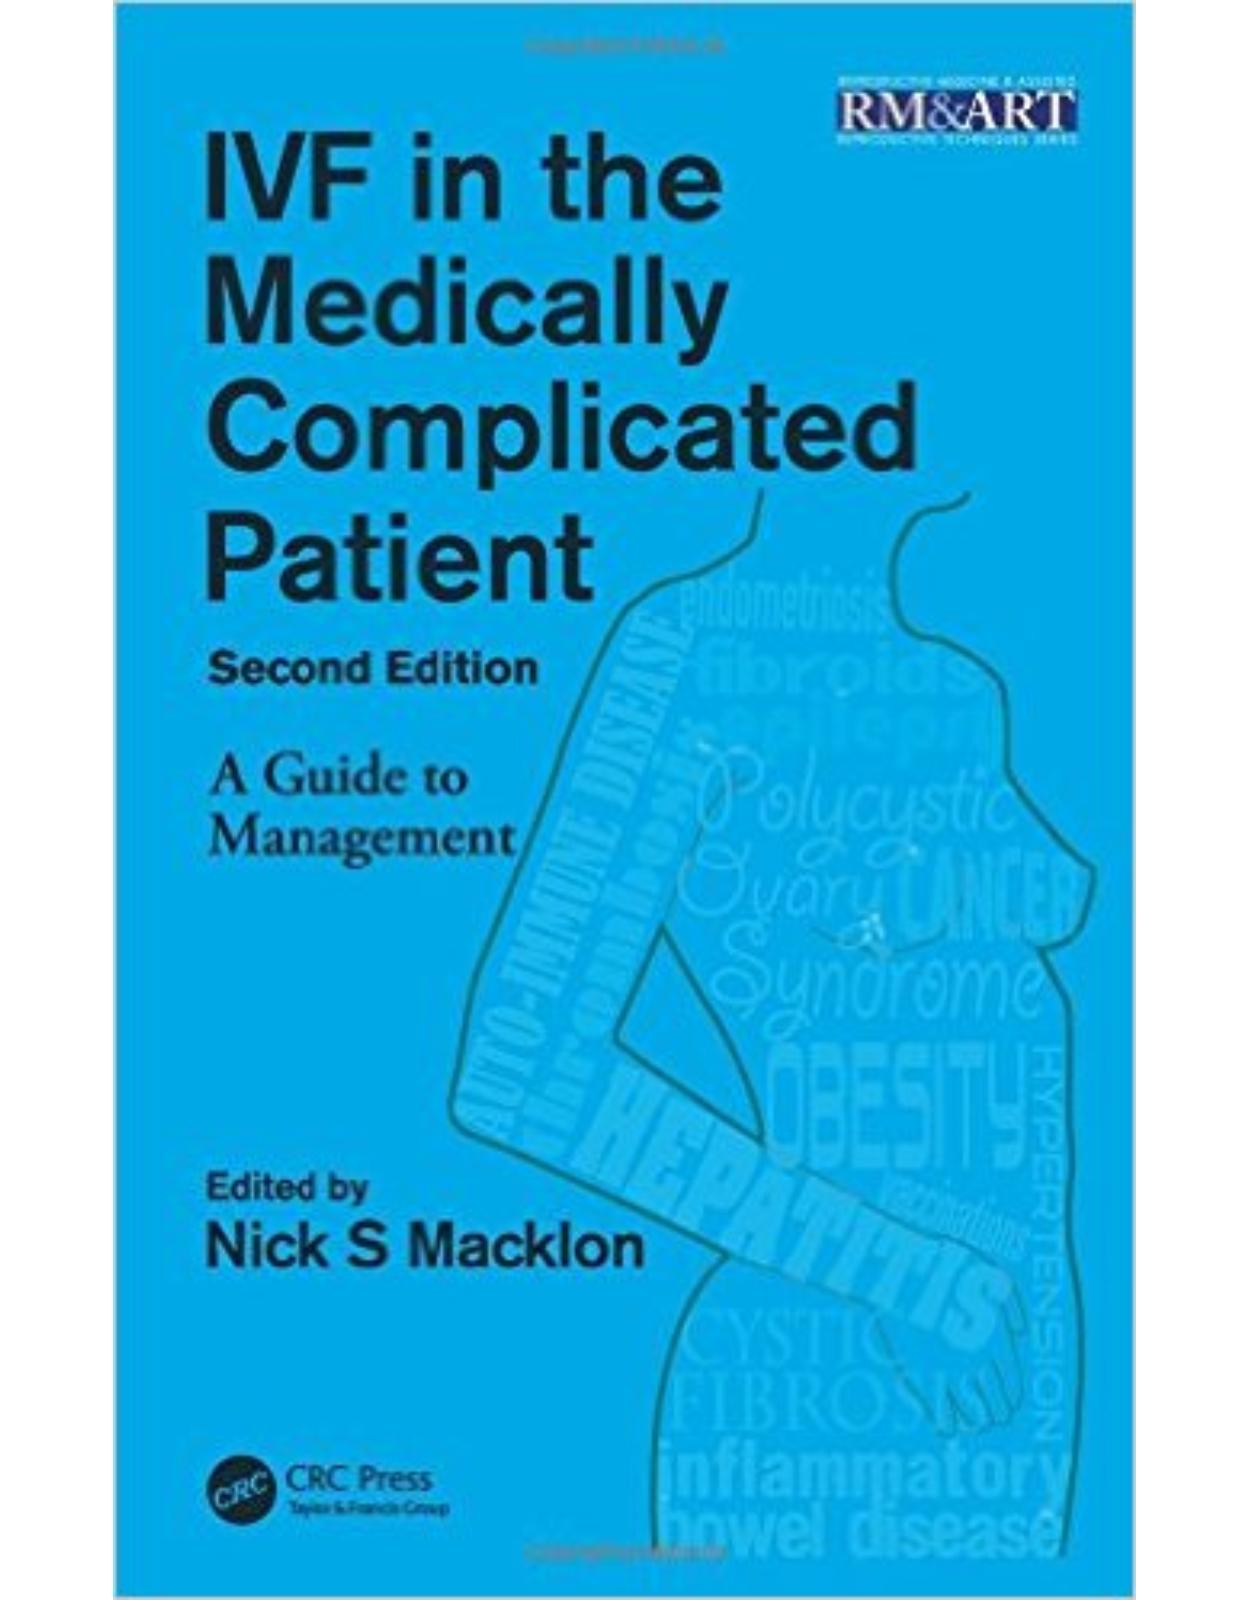 IVF in the Medically Complicated Patient, Second Edition: A Guide to Management (Reproductive Medicine and Assisted Reproductive Techniques Series) 